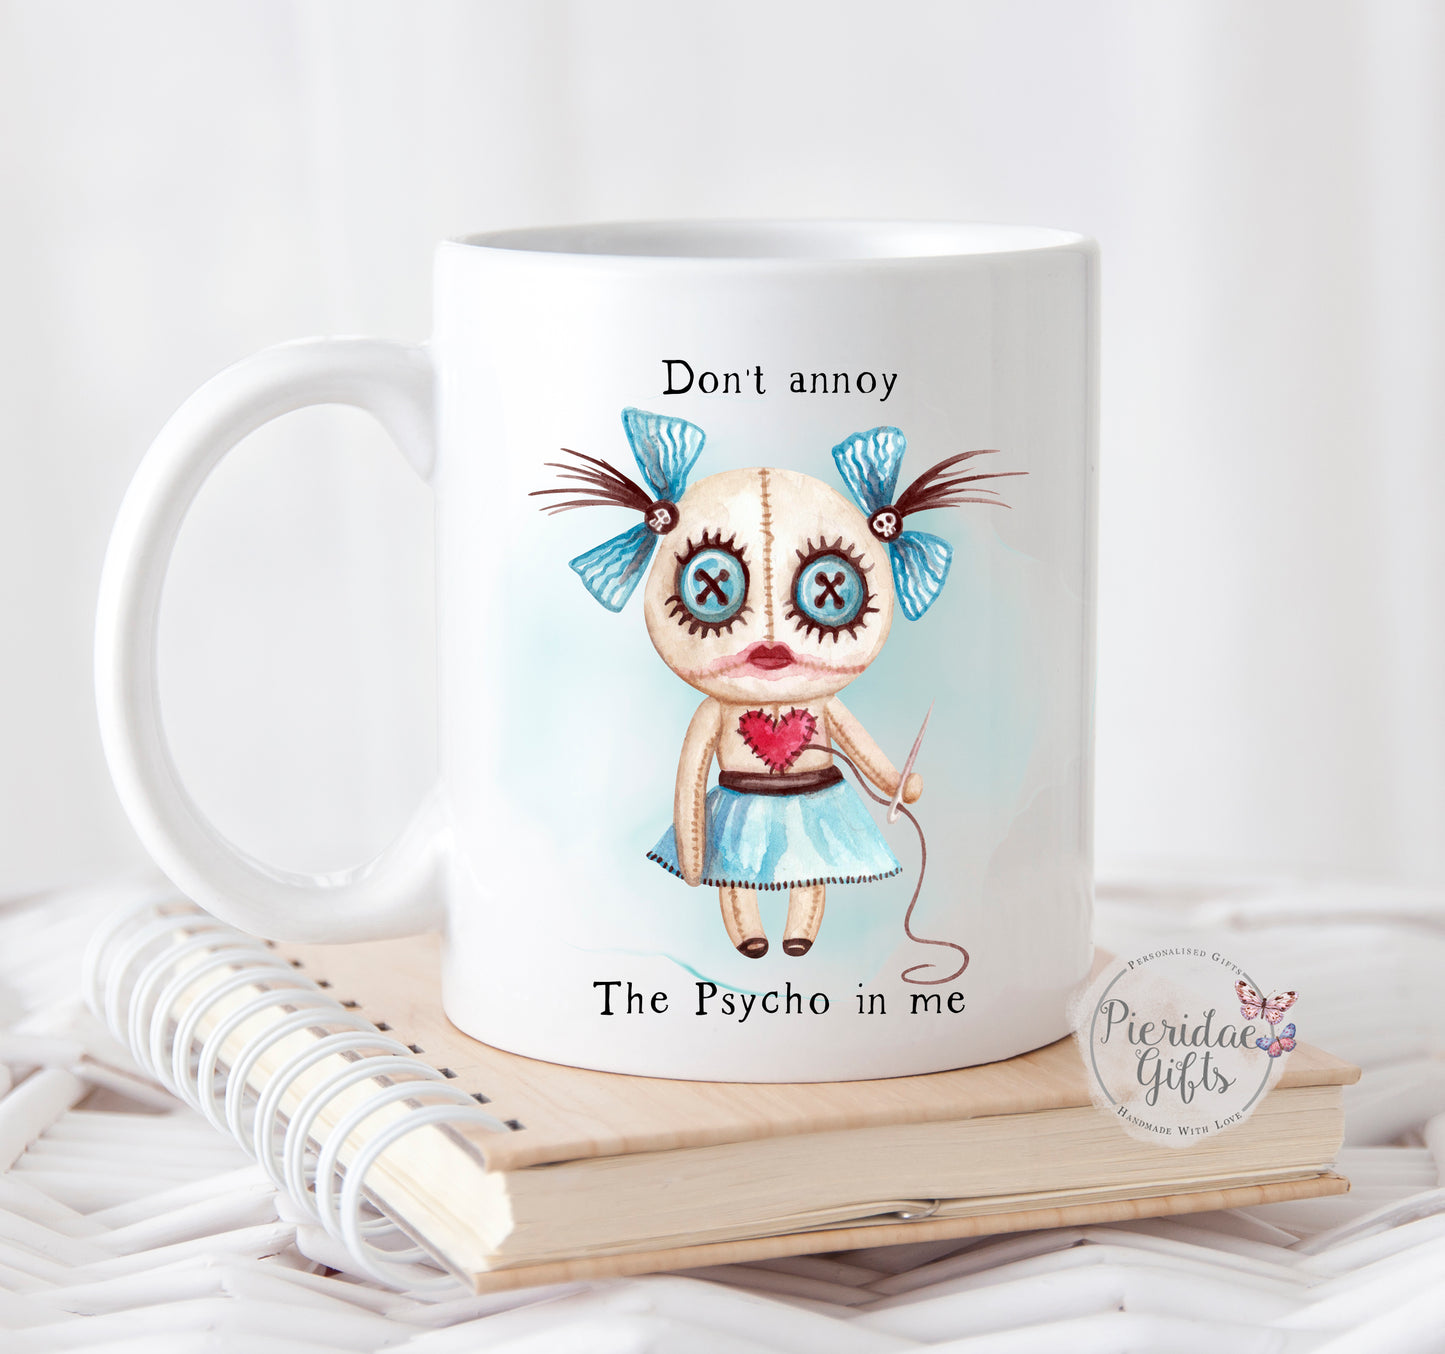 Don't annoy the Psycho in me Mug